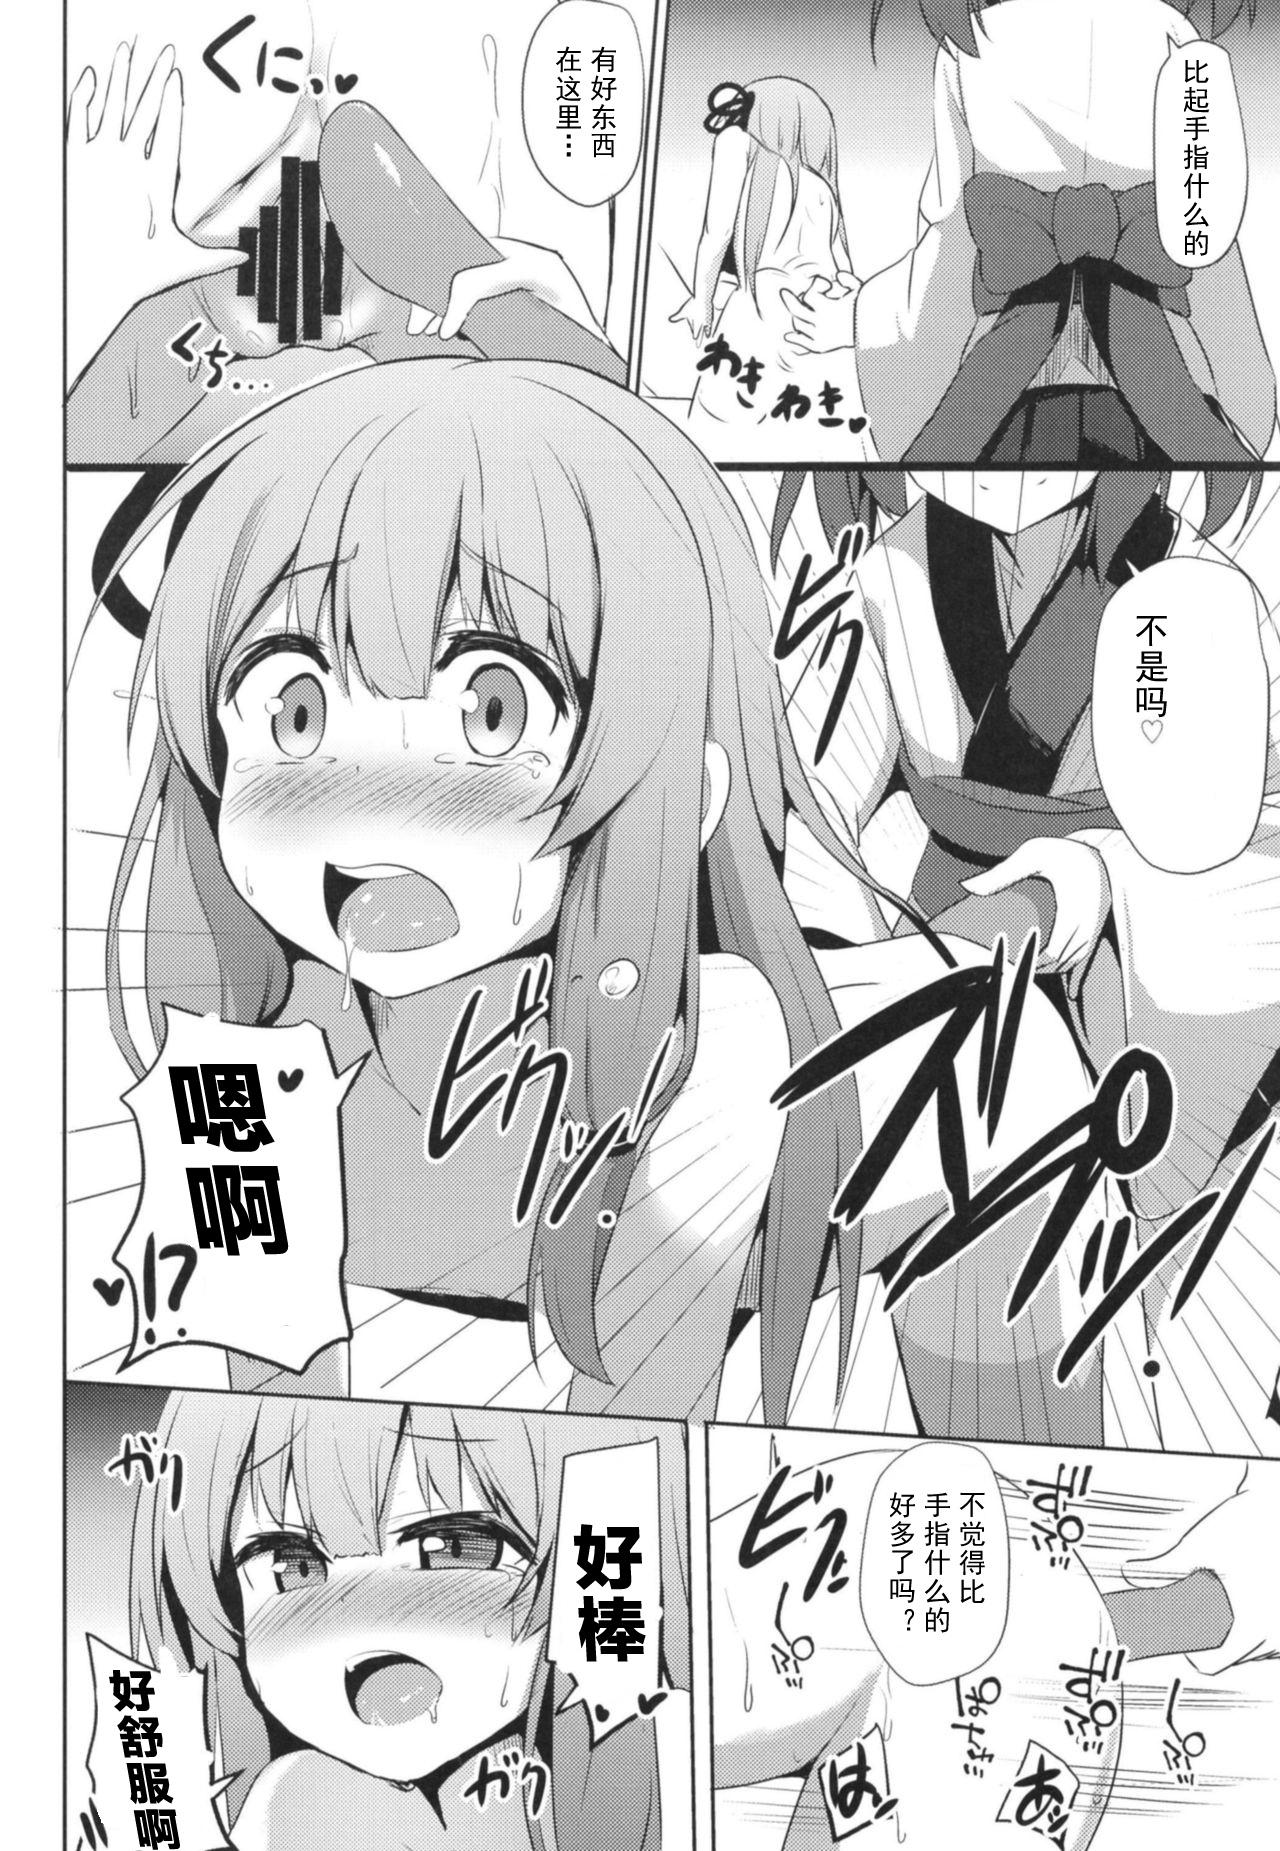 Selfie [Milk Pudding (Jamcy)] Akane-chan Challenge! 4-kaime (VOICEROID) [Chinese] [古早个人汉化] [Digital] - Voiceroid Loira - Page 10